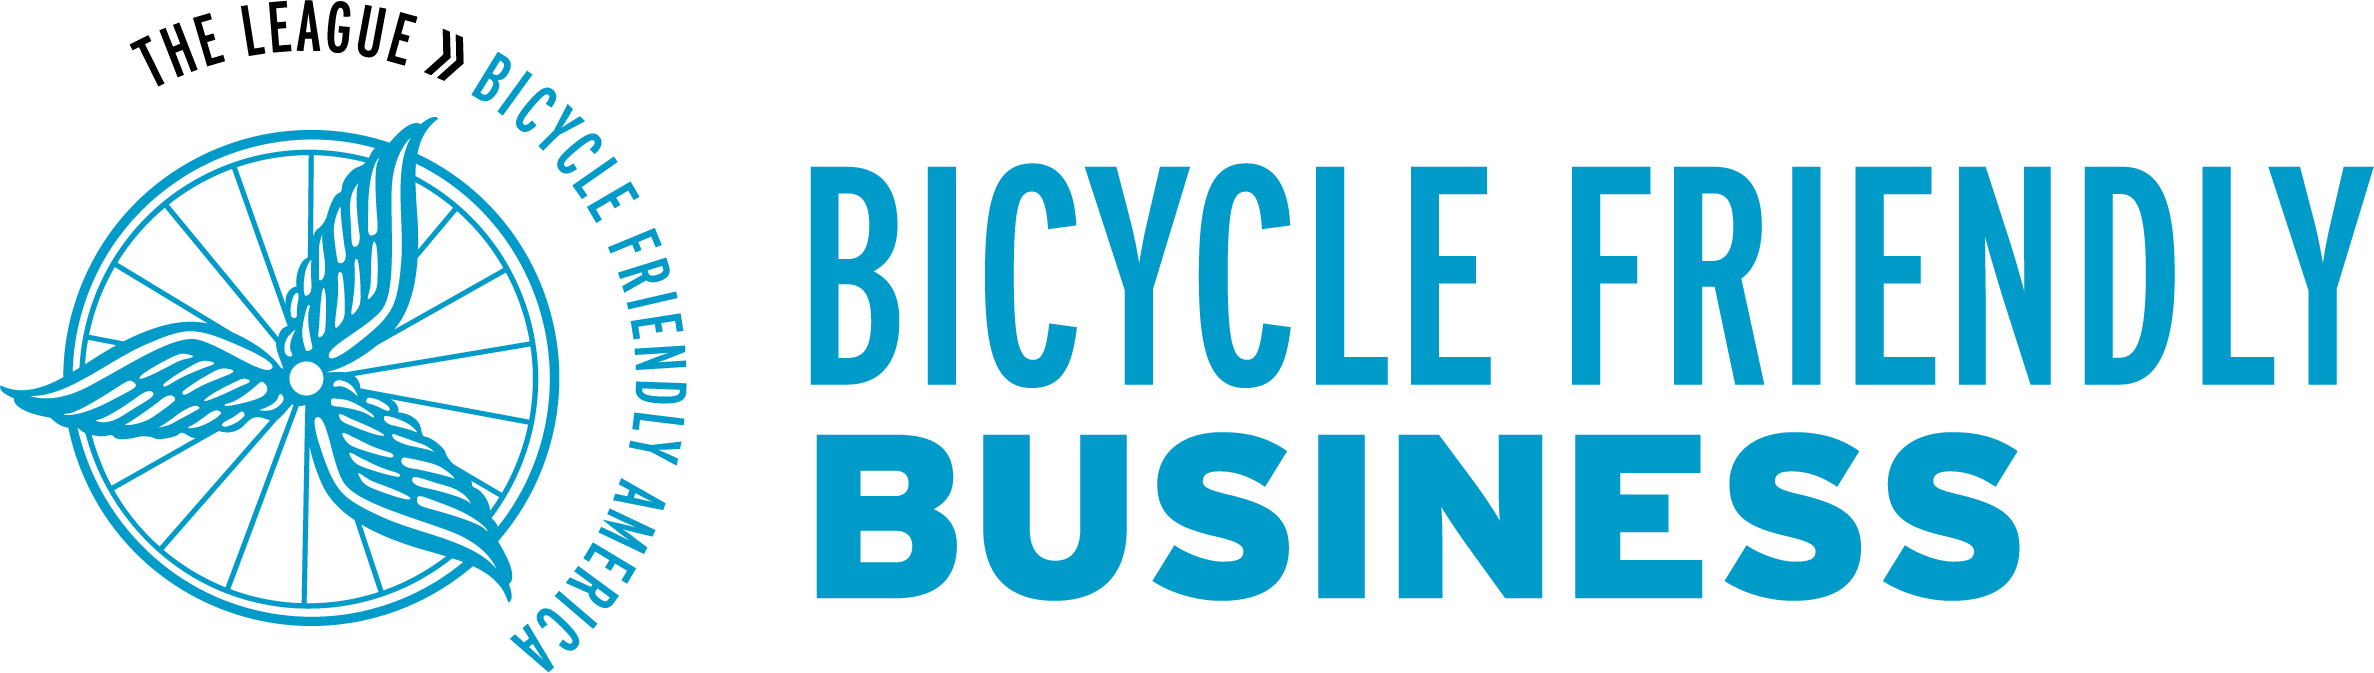 Plan Hillsborough named a Gold Level Bicycle Friendly Business by the League of American Bicyclists